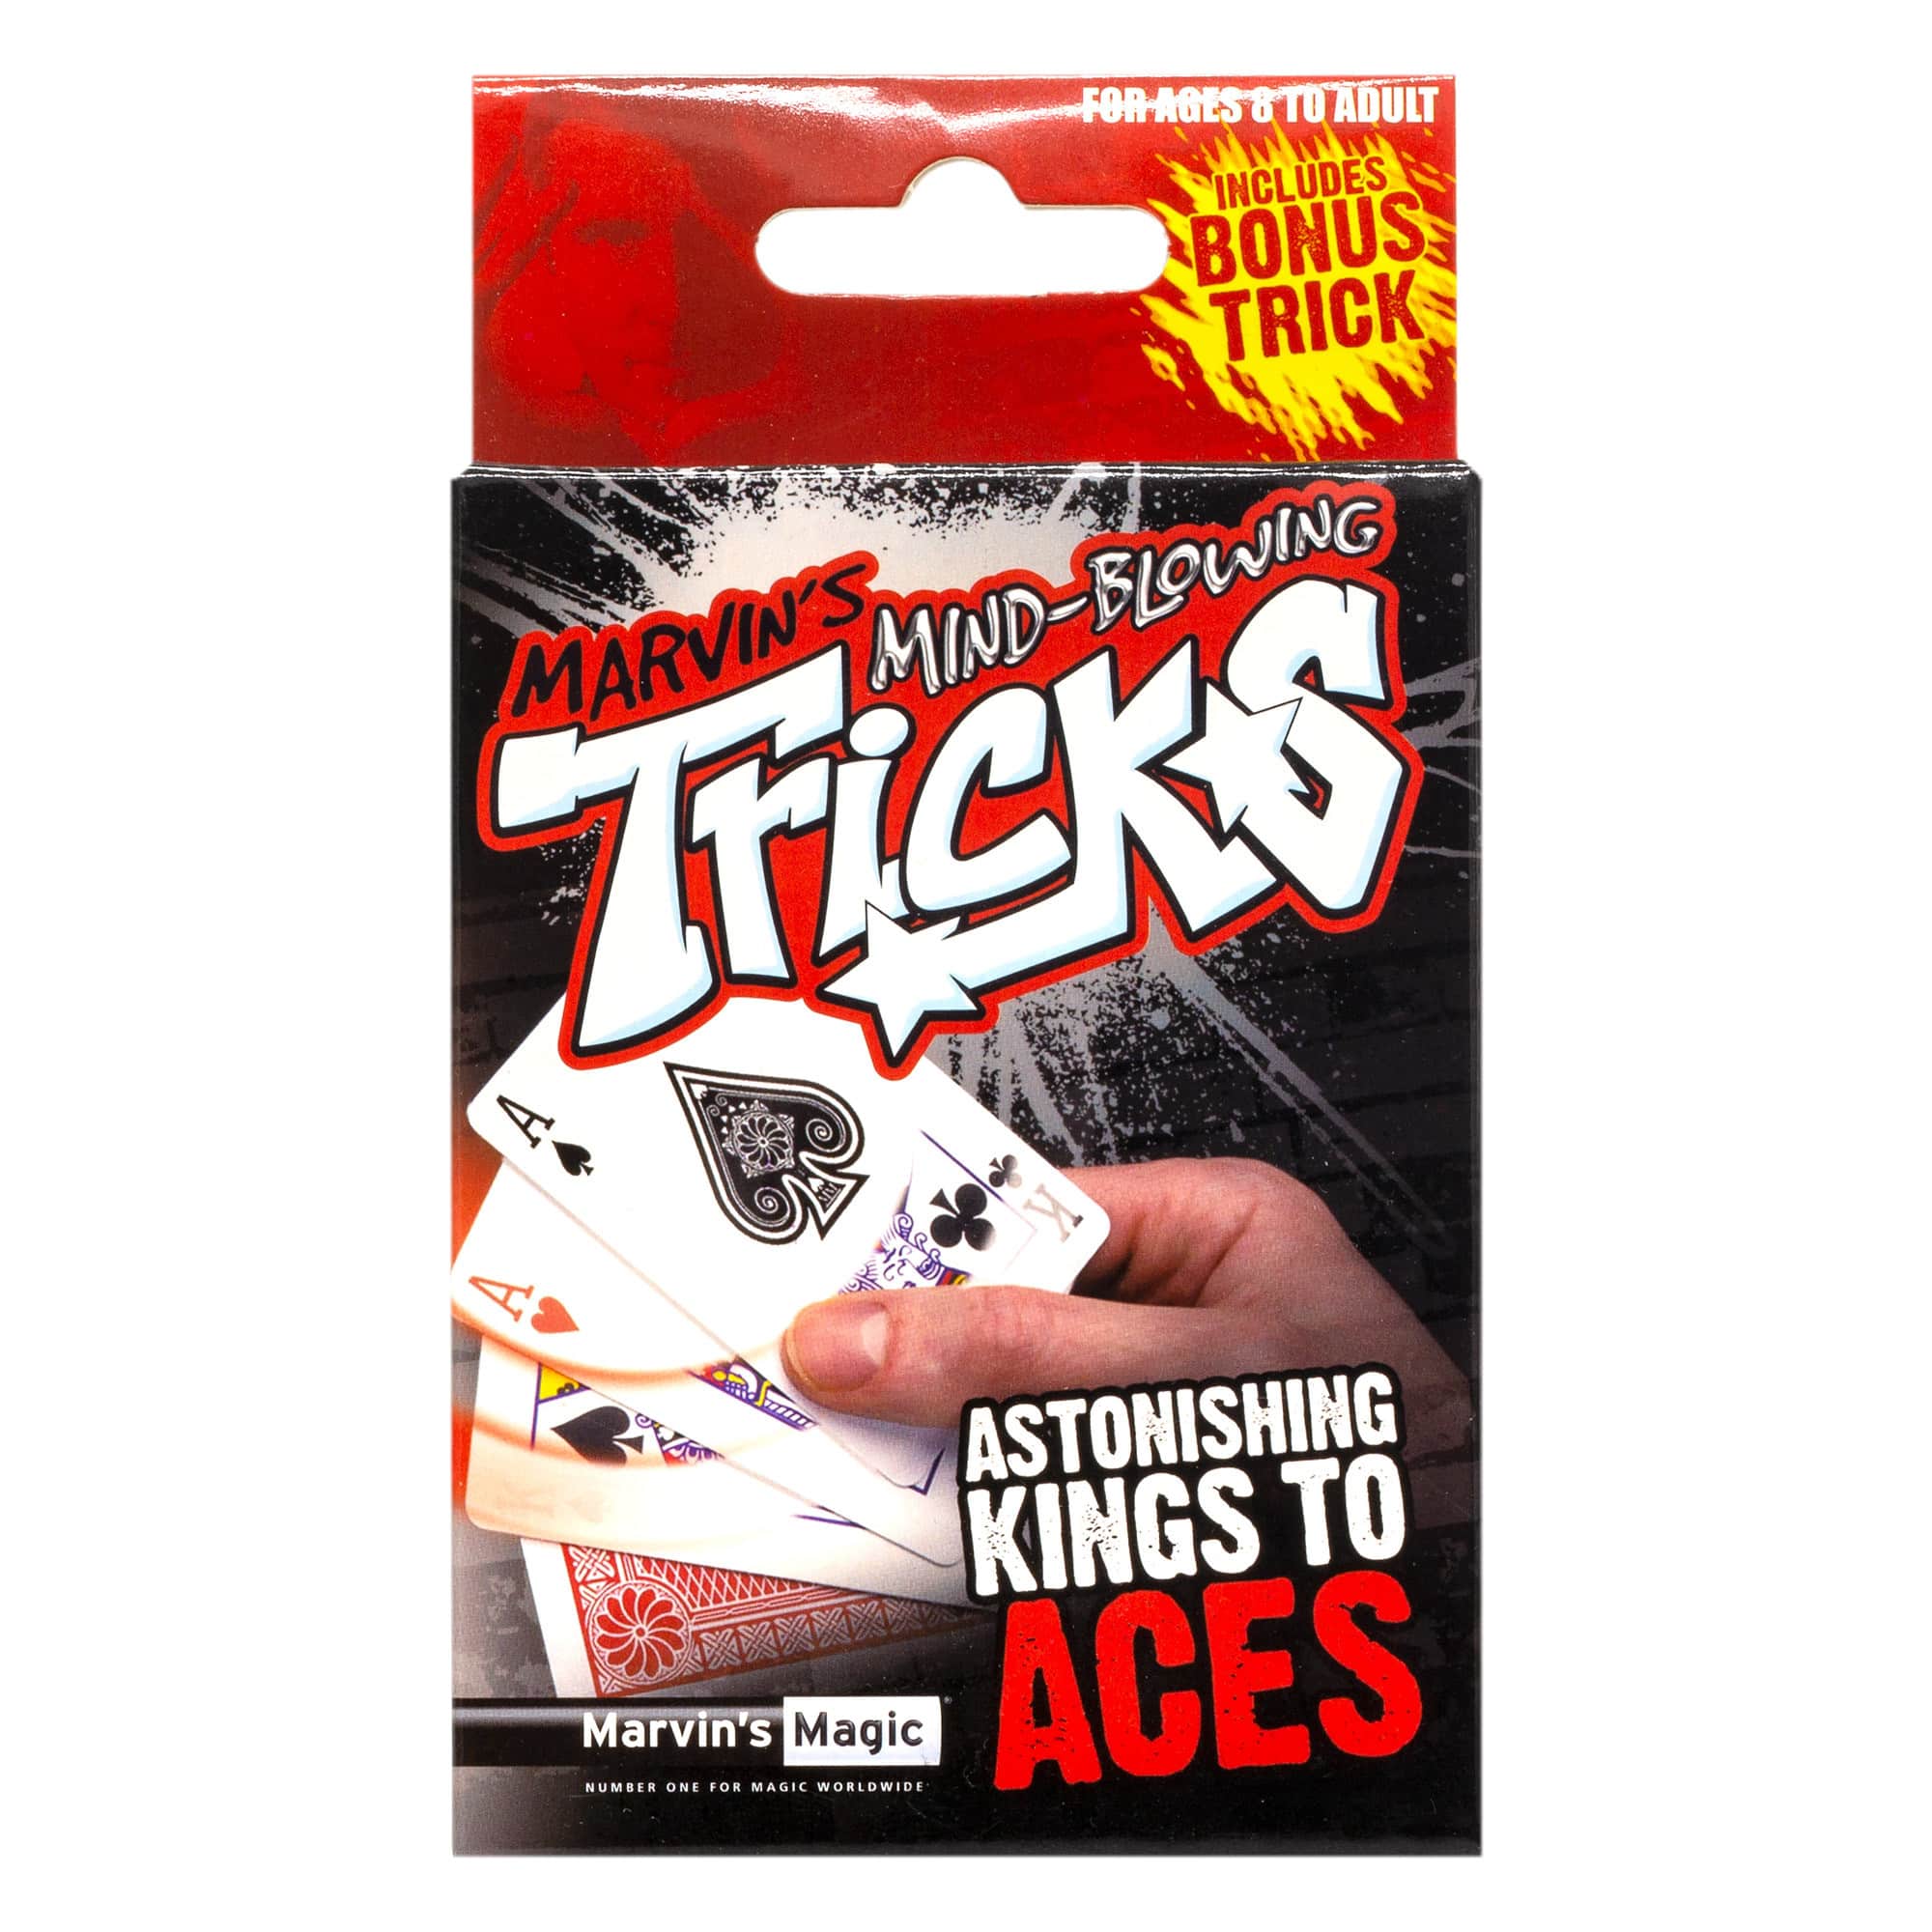 Marvin's Magic - Mind-Blowing Tricks Card Tricks - Astonishing Kings of Aces